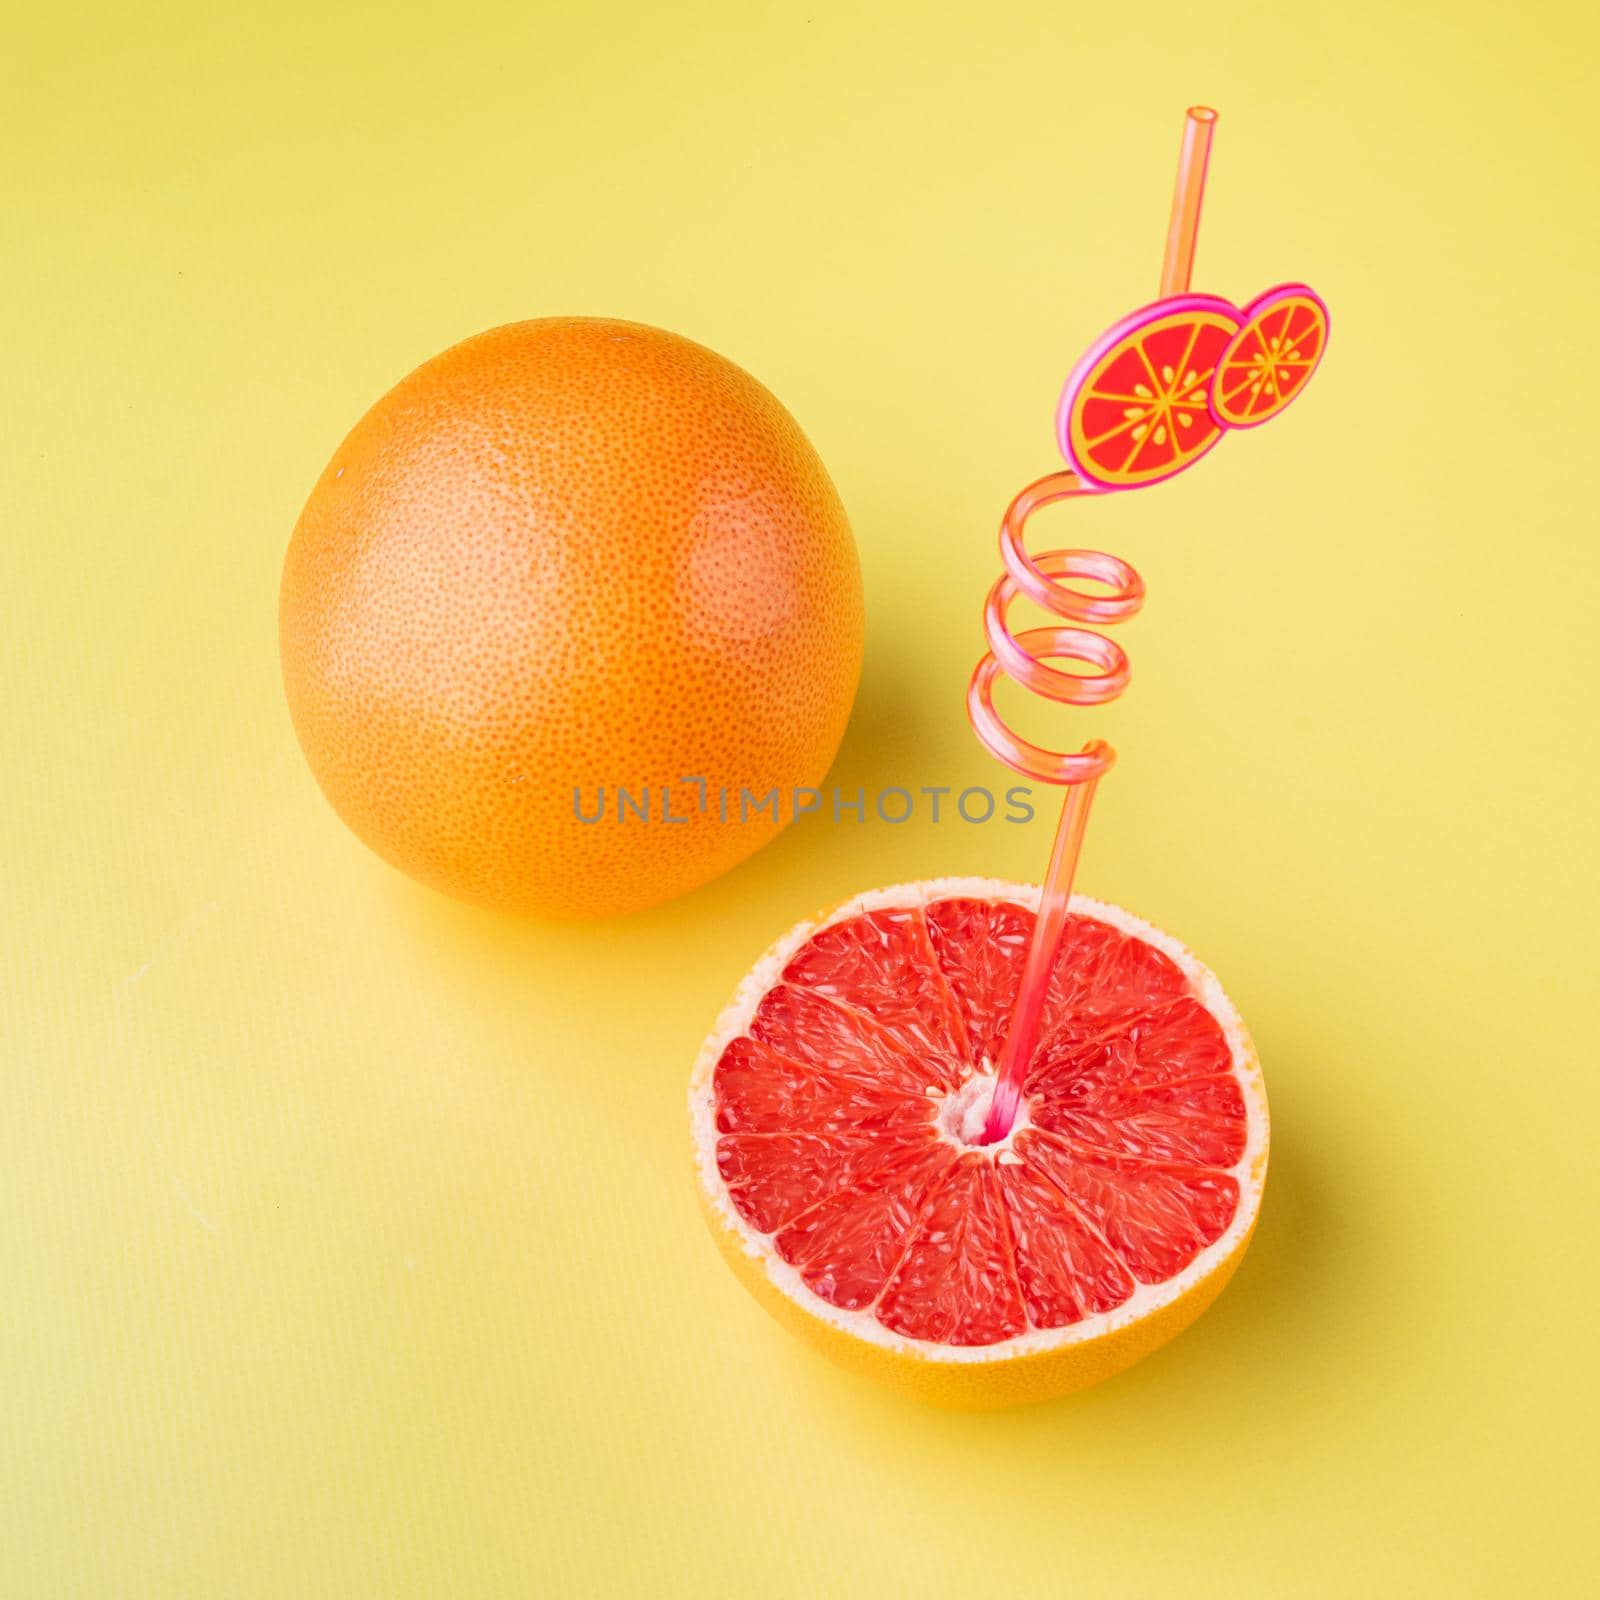 Grapefruit cuts set, on yellow textured summer background, square format